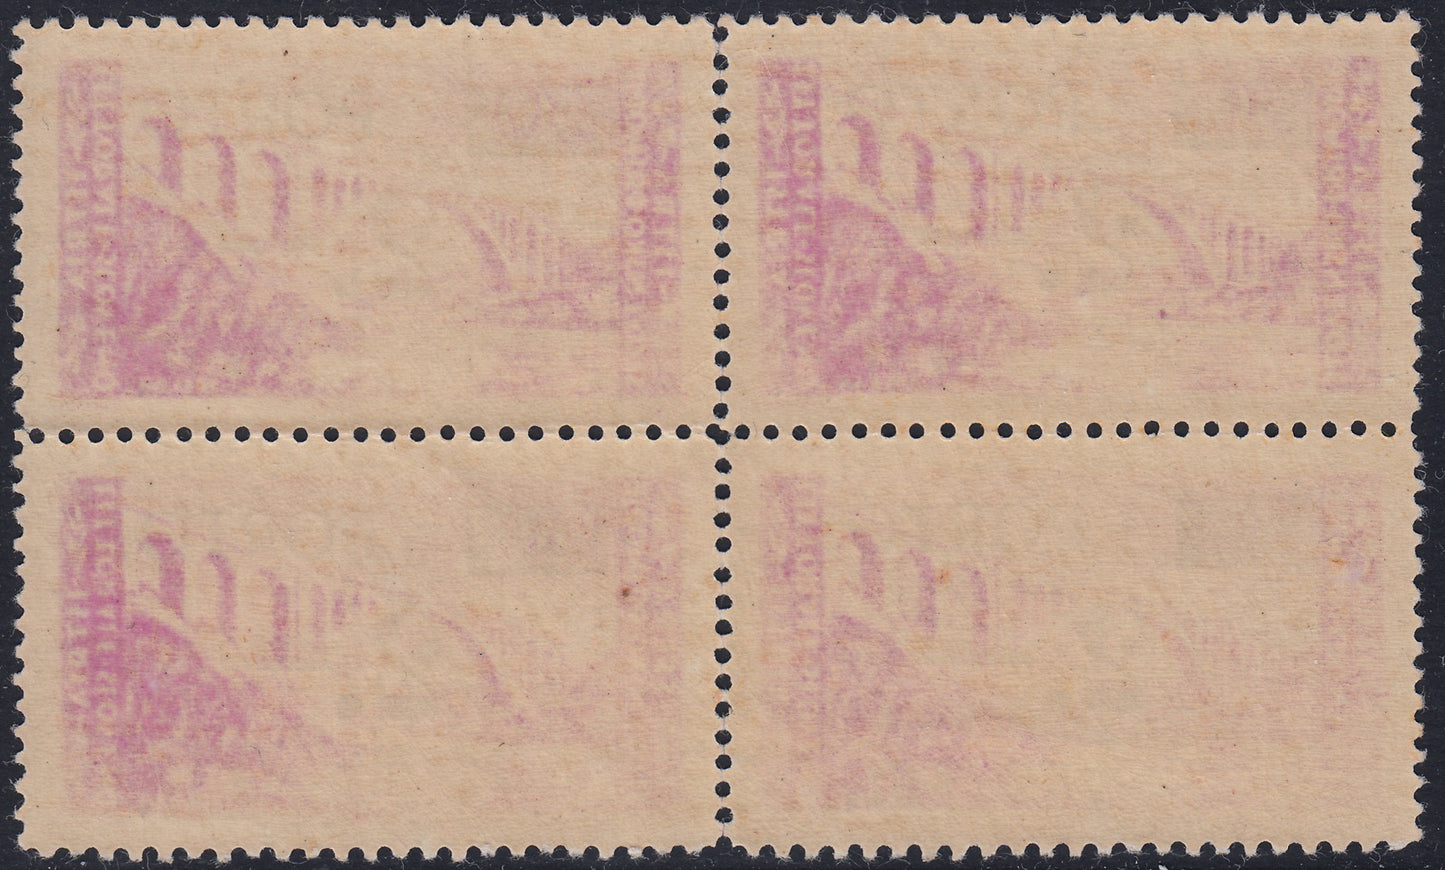 T125 -Tax postage, 2L. on 30c. lilac block of four copies with type II and III plug, new, intact rubber (7/II + 7/III)